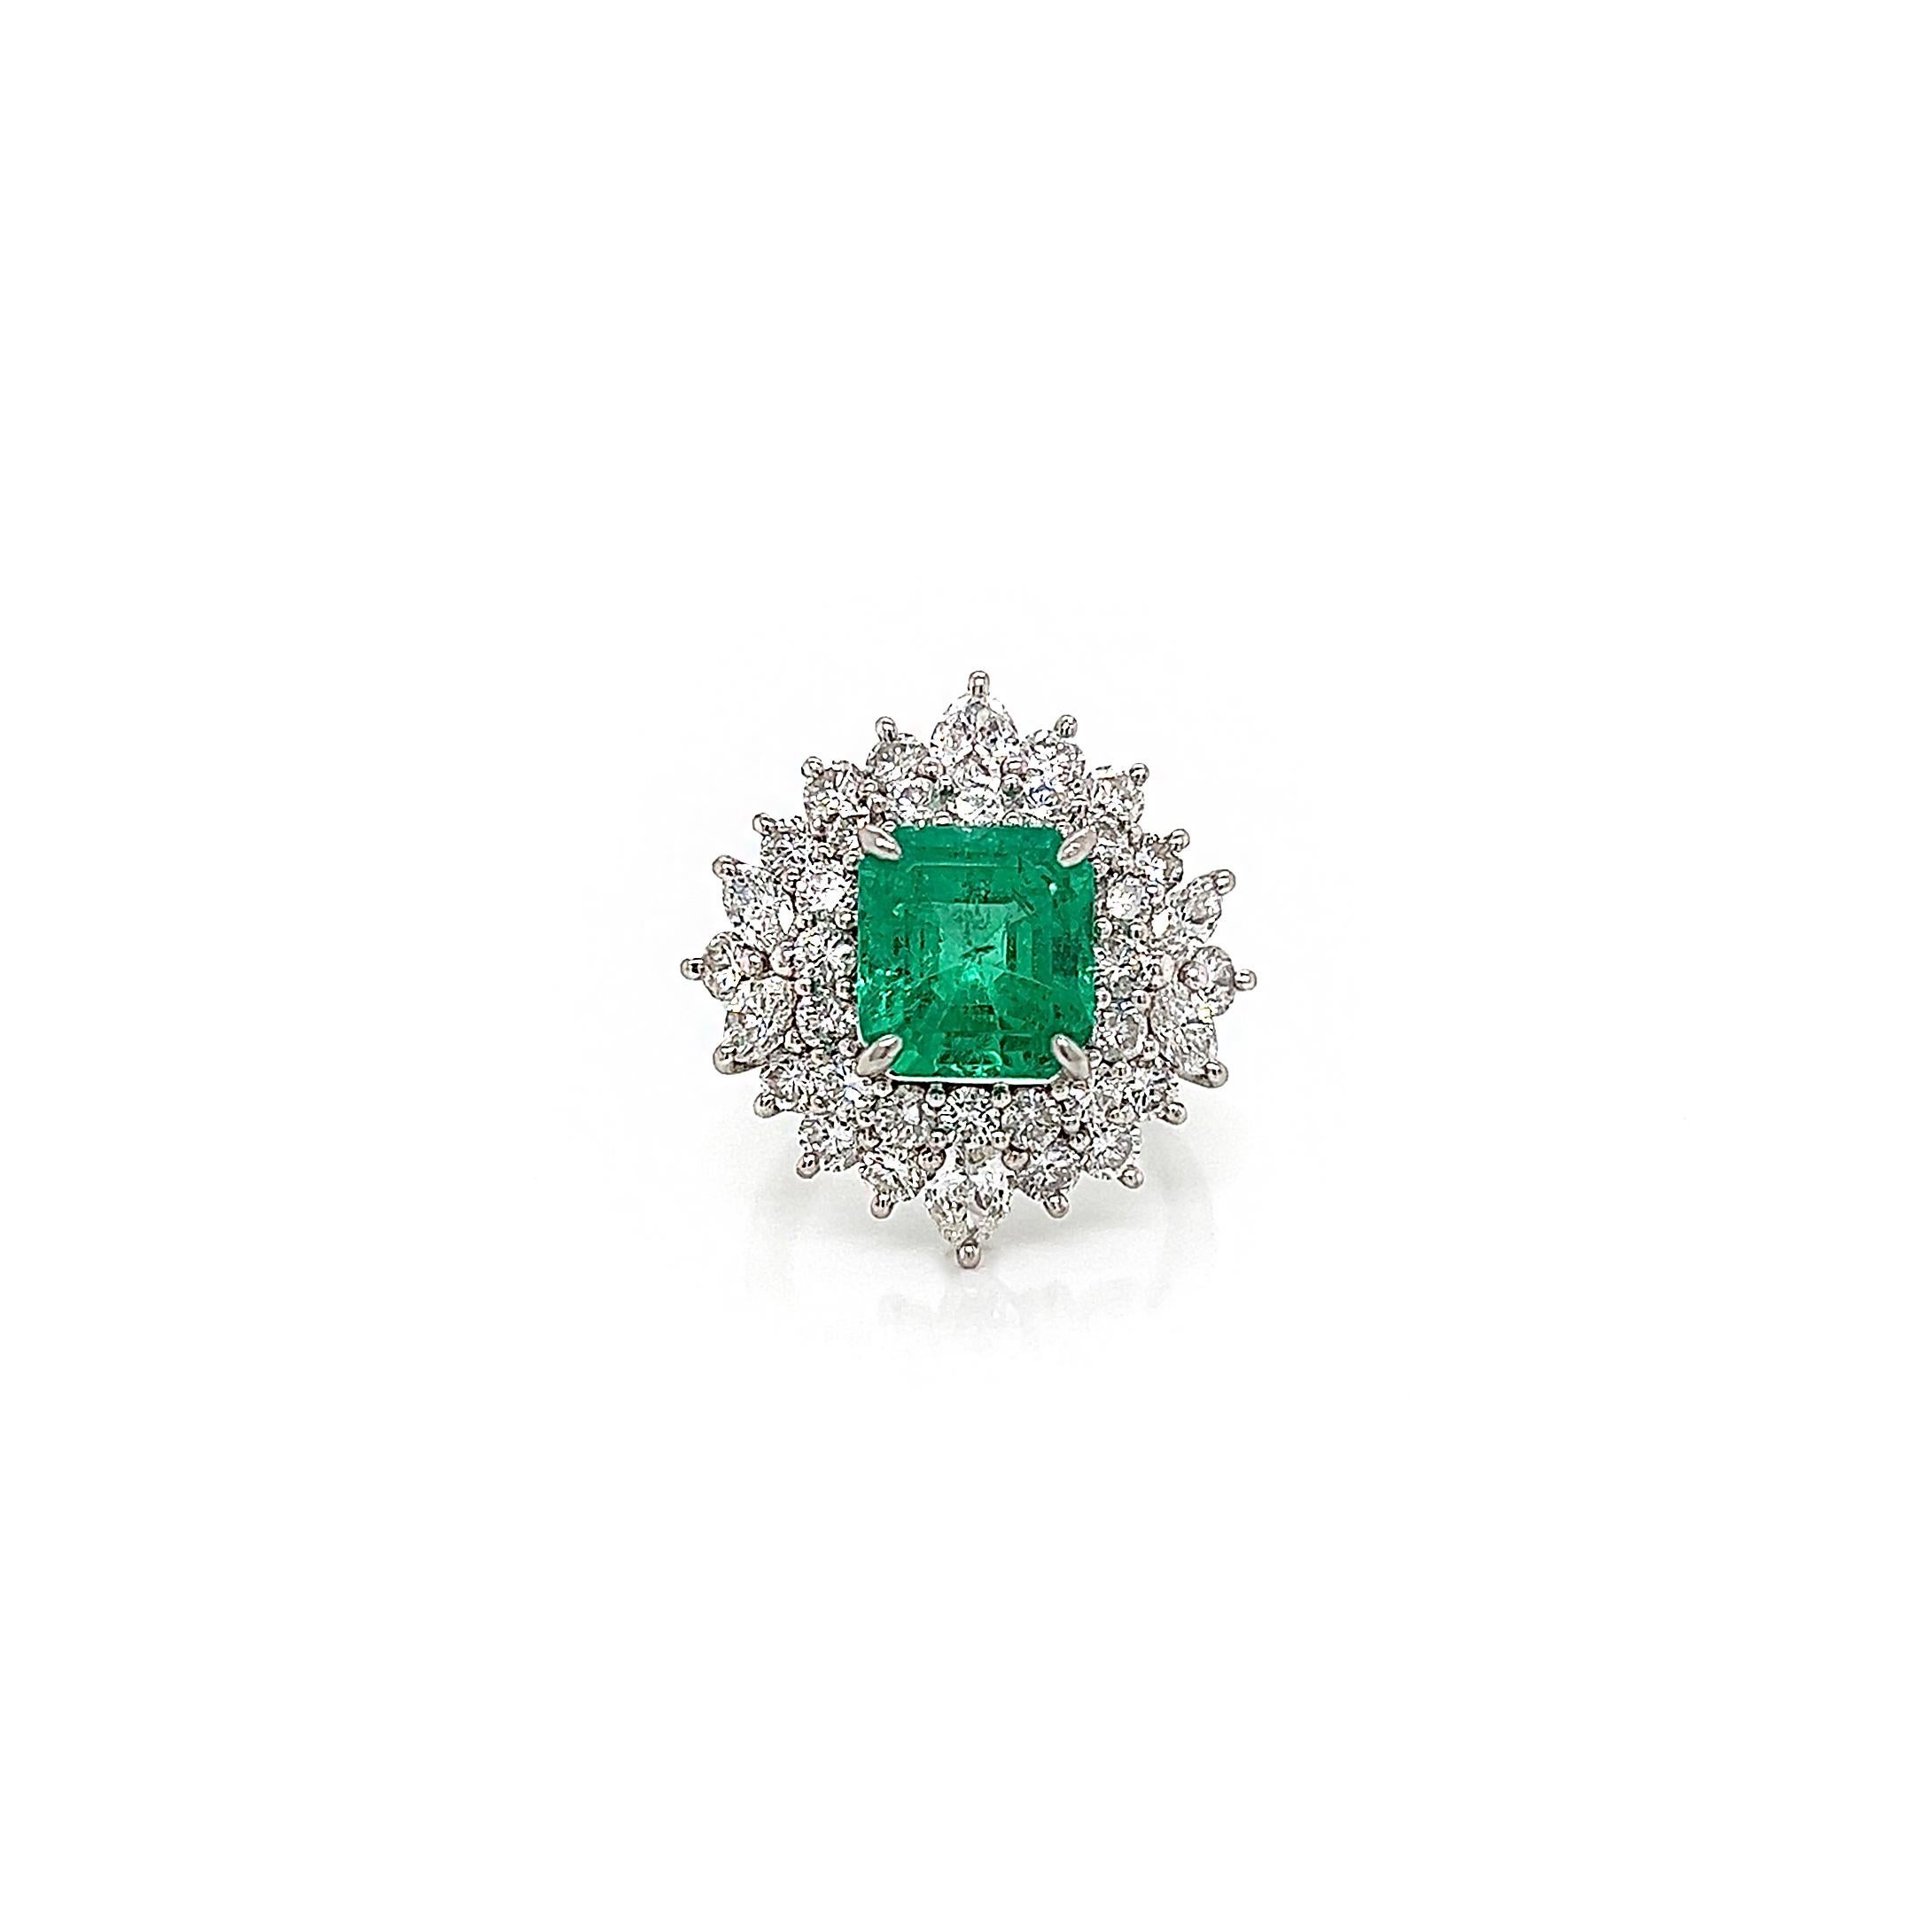 5.48 Total Carat Emerald and Diamond Halo Prong-Set Ladies Ring

-Metal Type: Platinum
-3.05 Carat Emerald Cut Natural Emerald
-Emerald Color: Green
-2.43 Carat Marquise, Pear and Round Natural side Diamonds. F-G Color, VS-SI Clarity

-Size